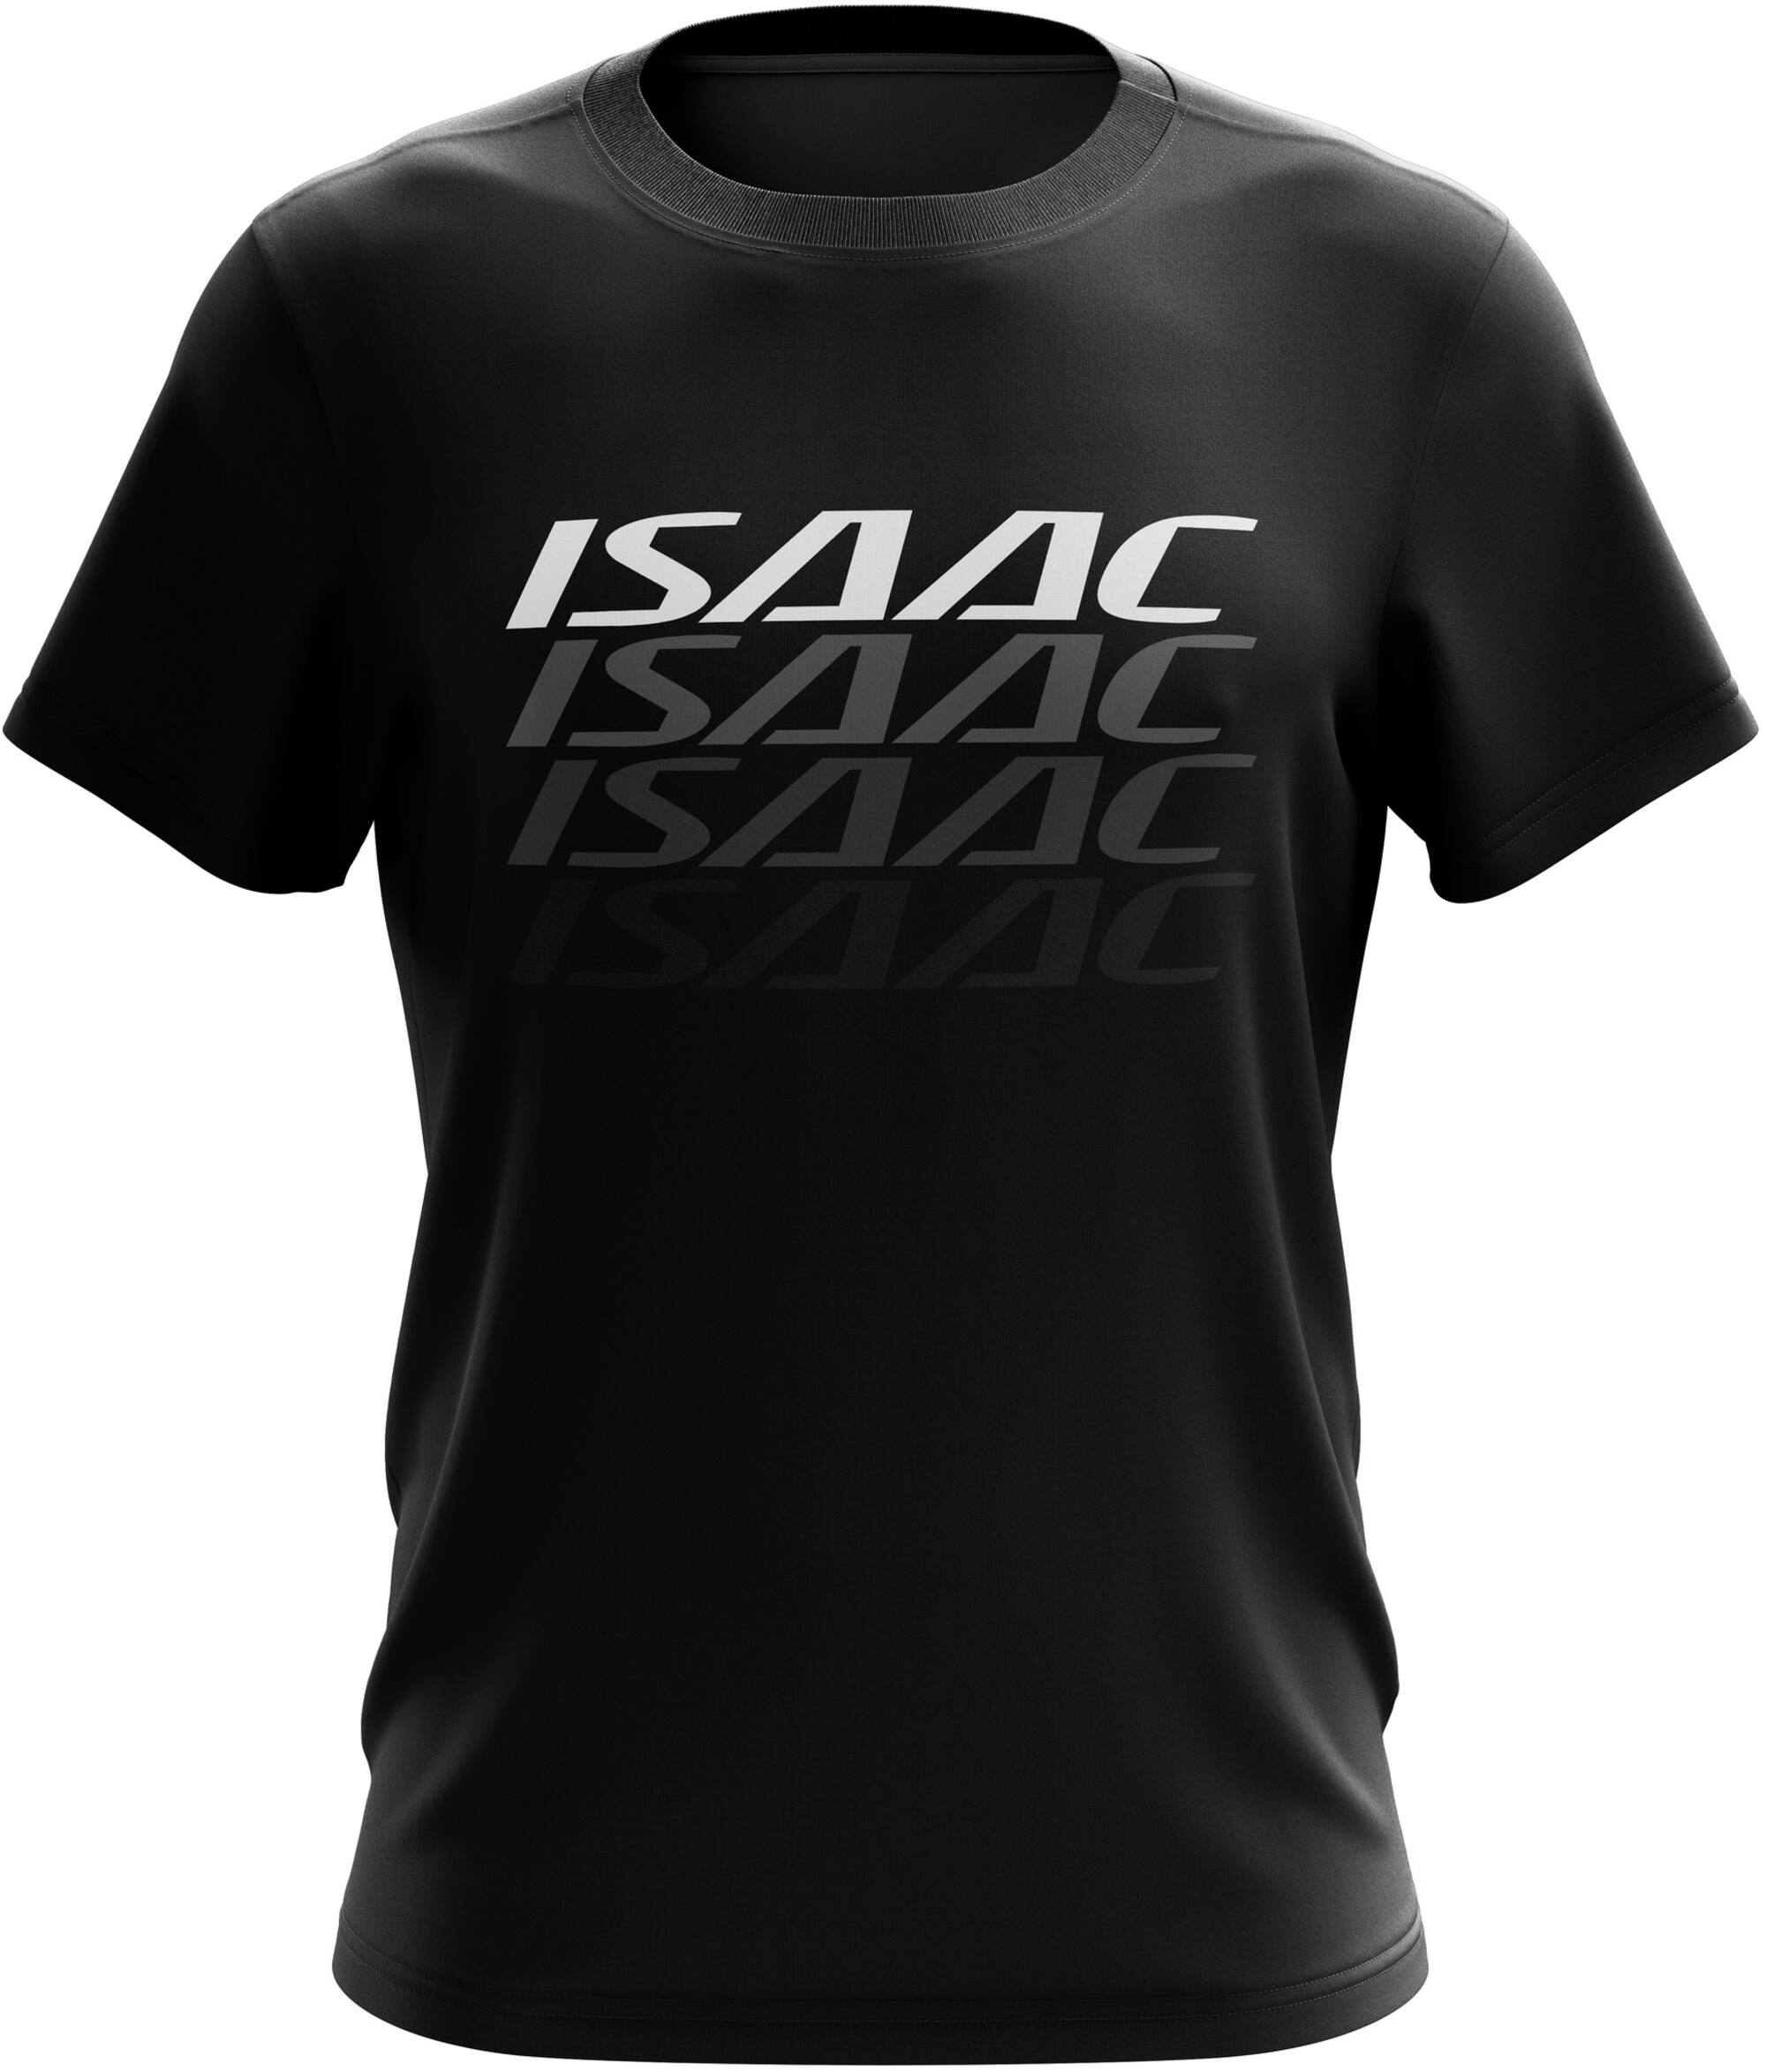 ISAAC T-SHIRT CASUAL SIZE S